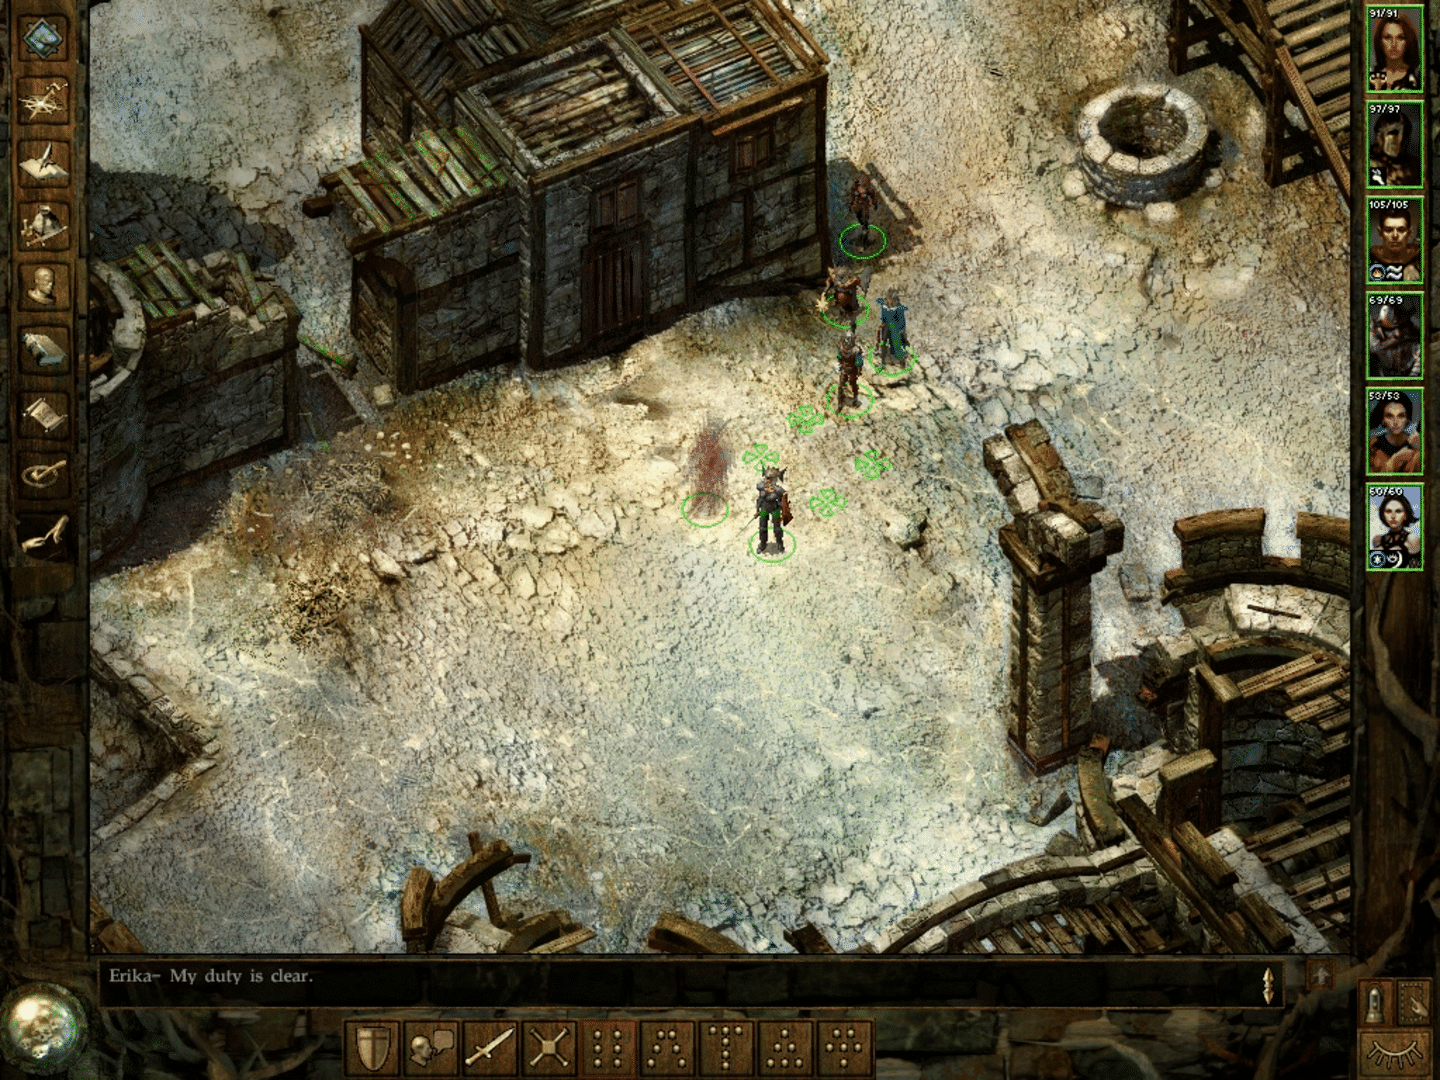 Icewind Dale: Heart of Winter - Trials of the Luremaster screenshot